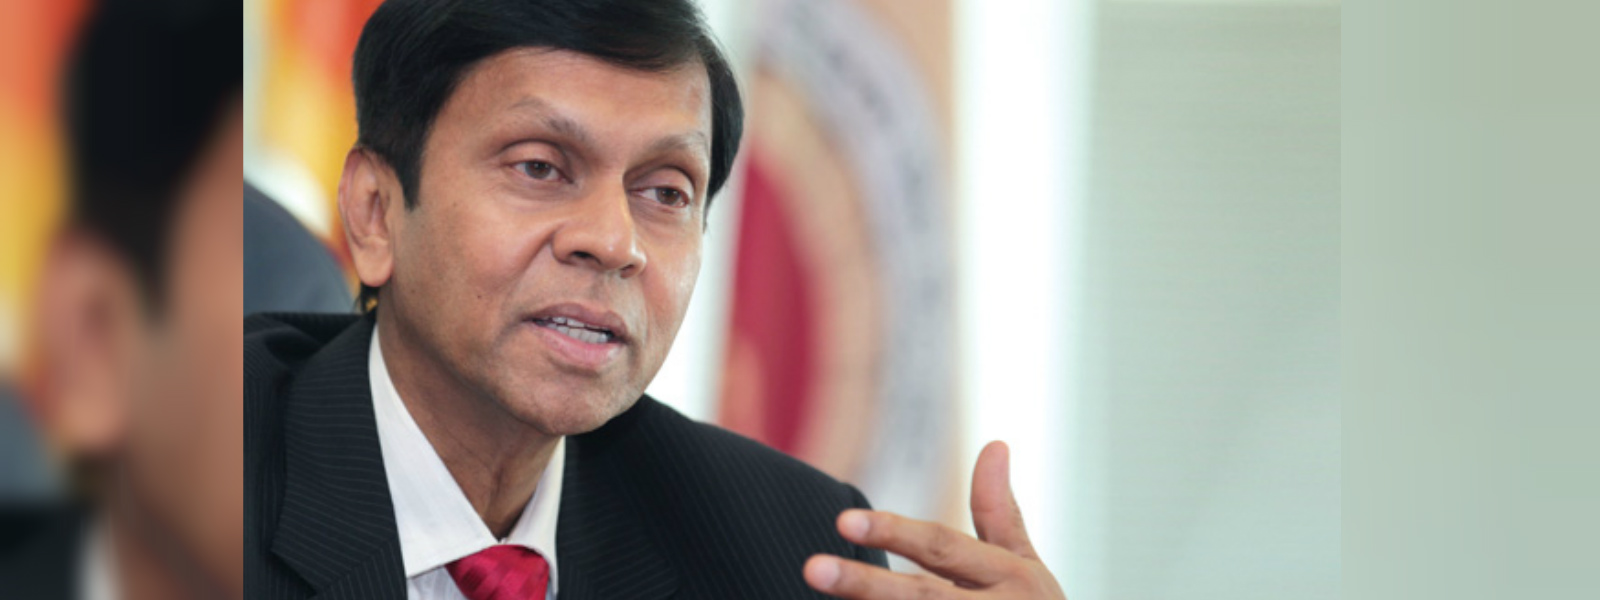 SL to obtain USD 700 mn loan from China : Cabraal